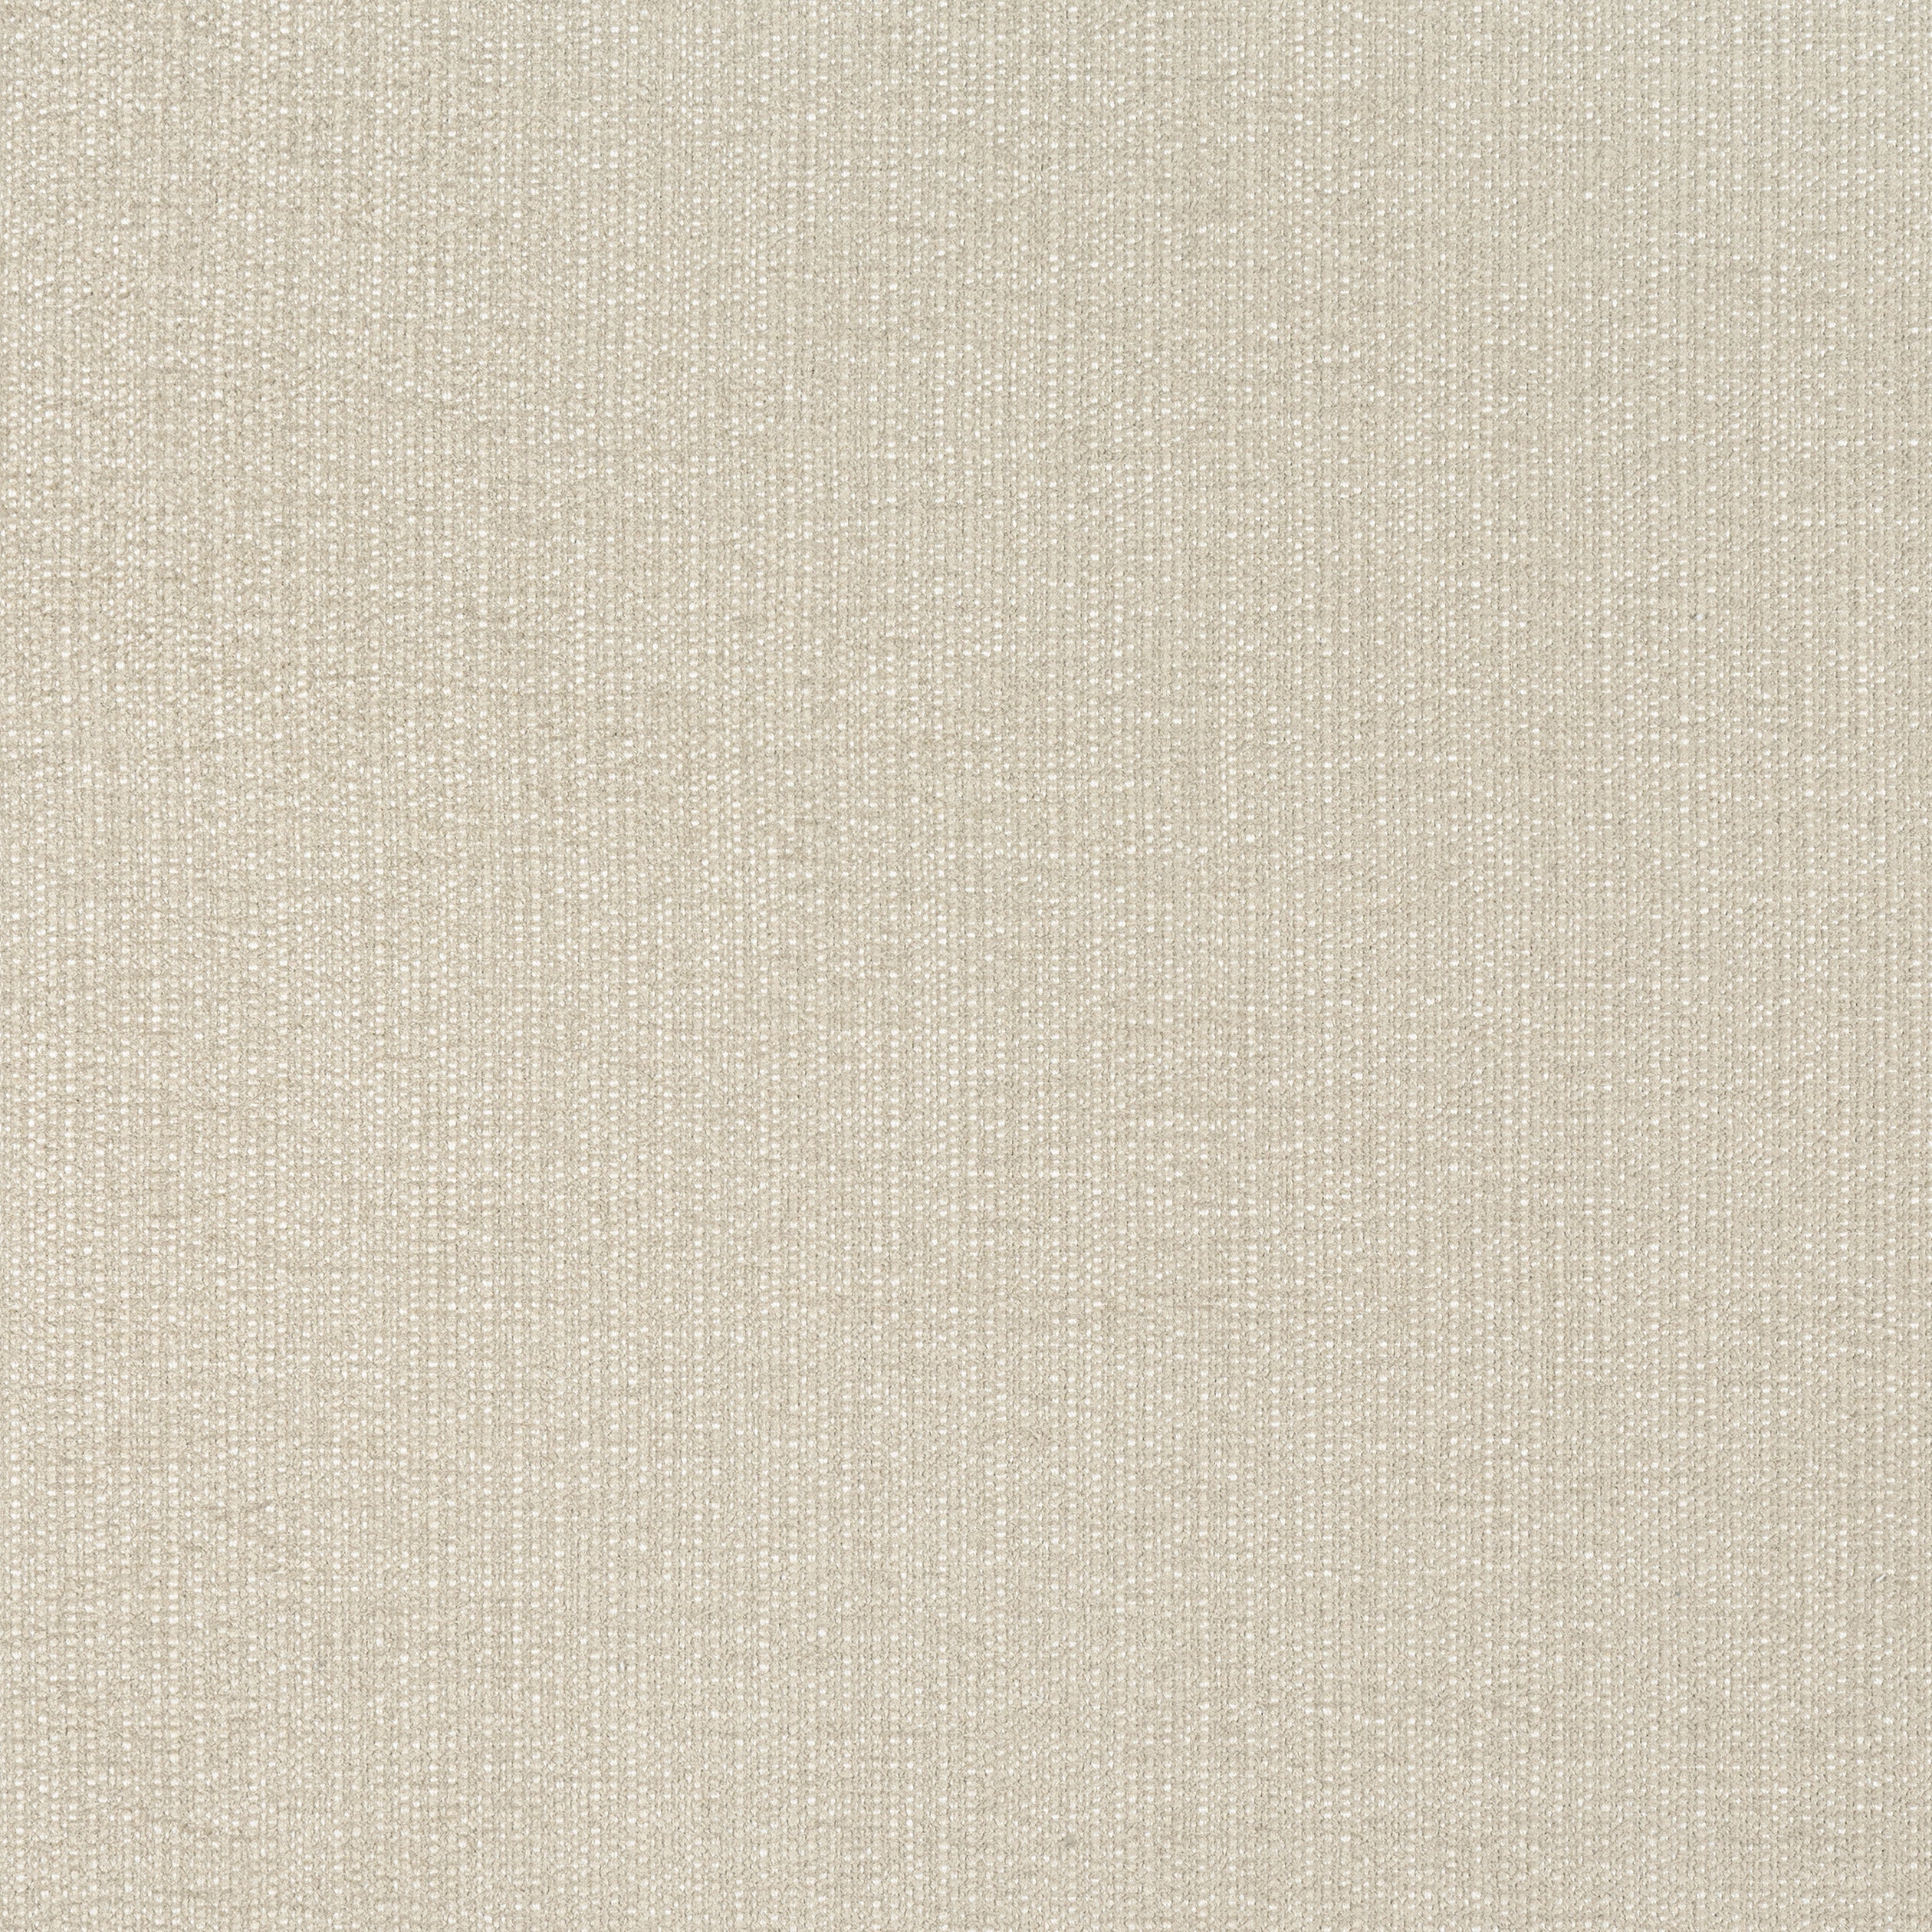 Veda fabric in stone color - pattern number W8710 - by Thibaut in the Haven Textures collection